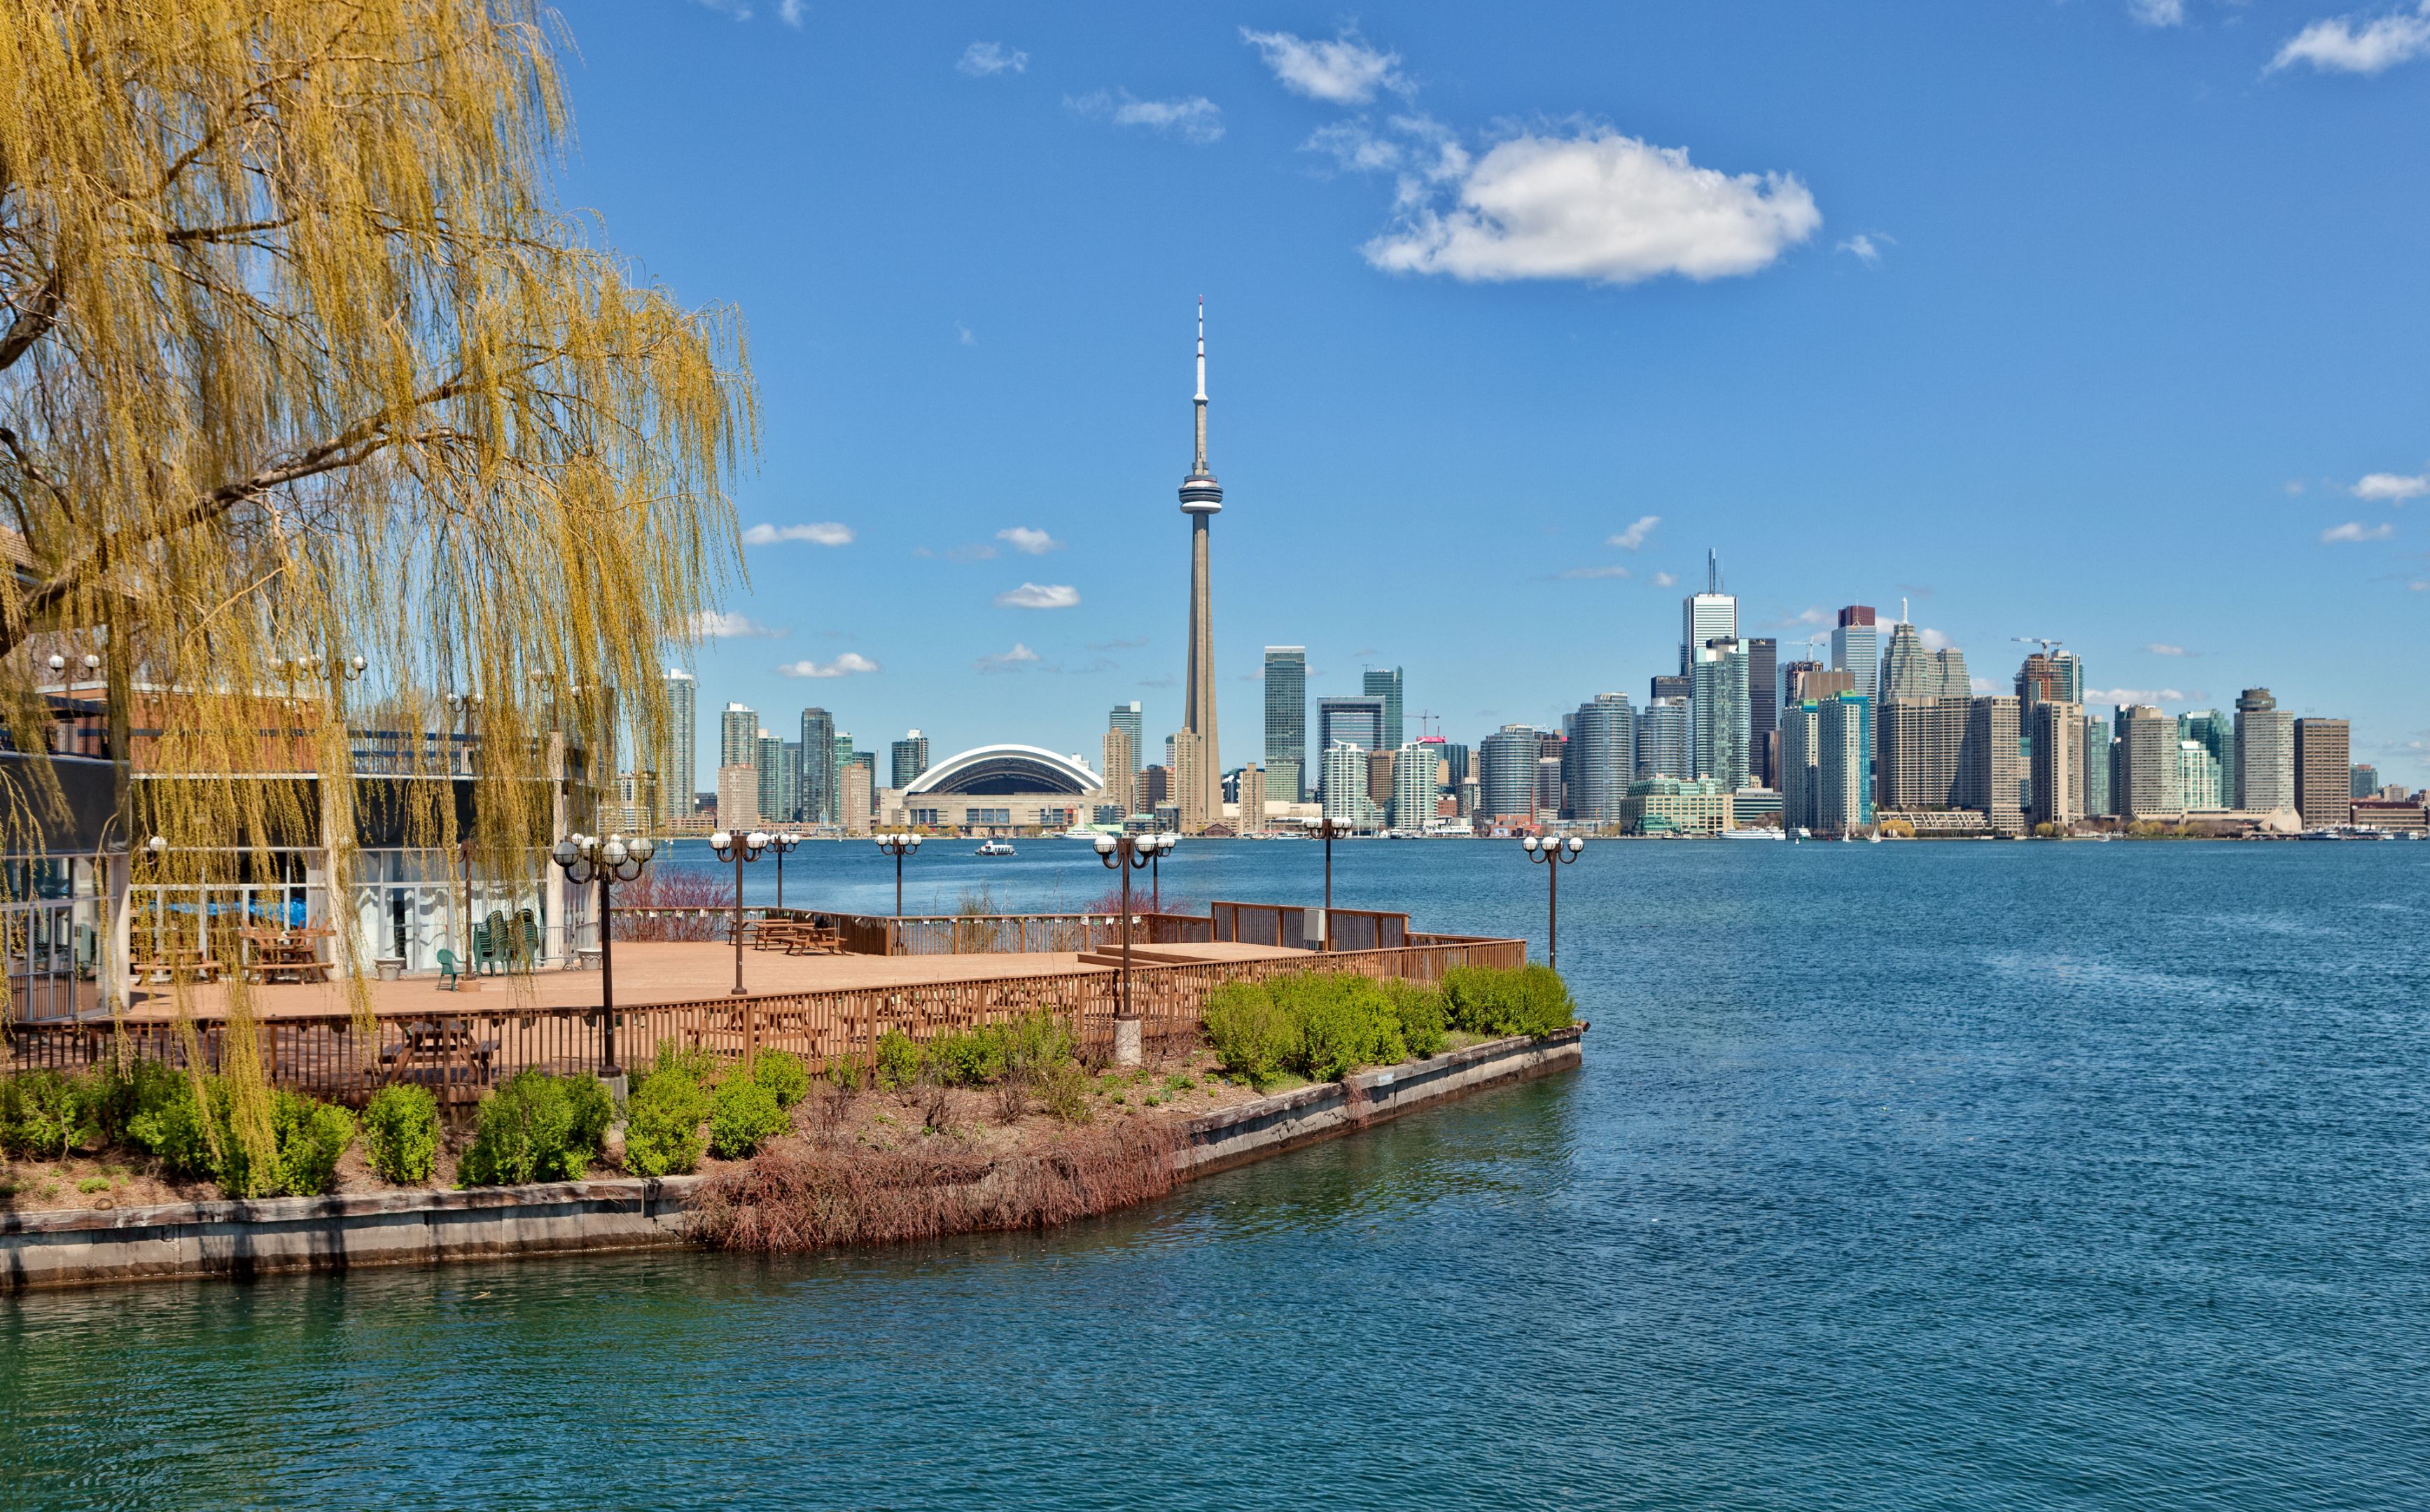 Toronto Island with a view of Toronto city in the background